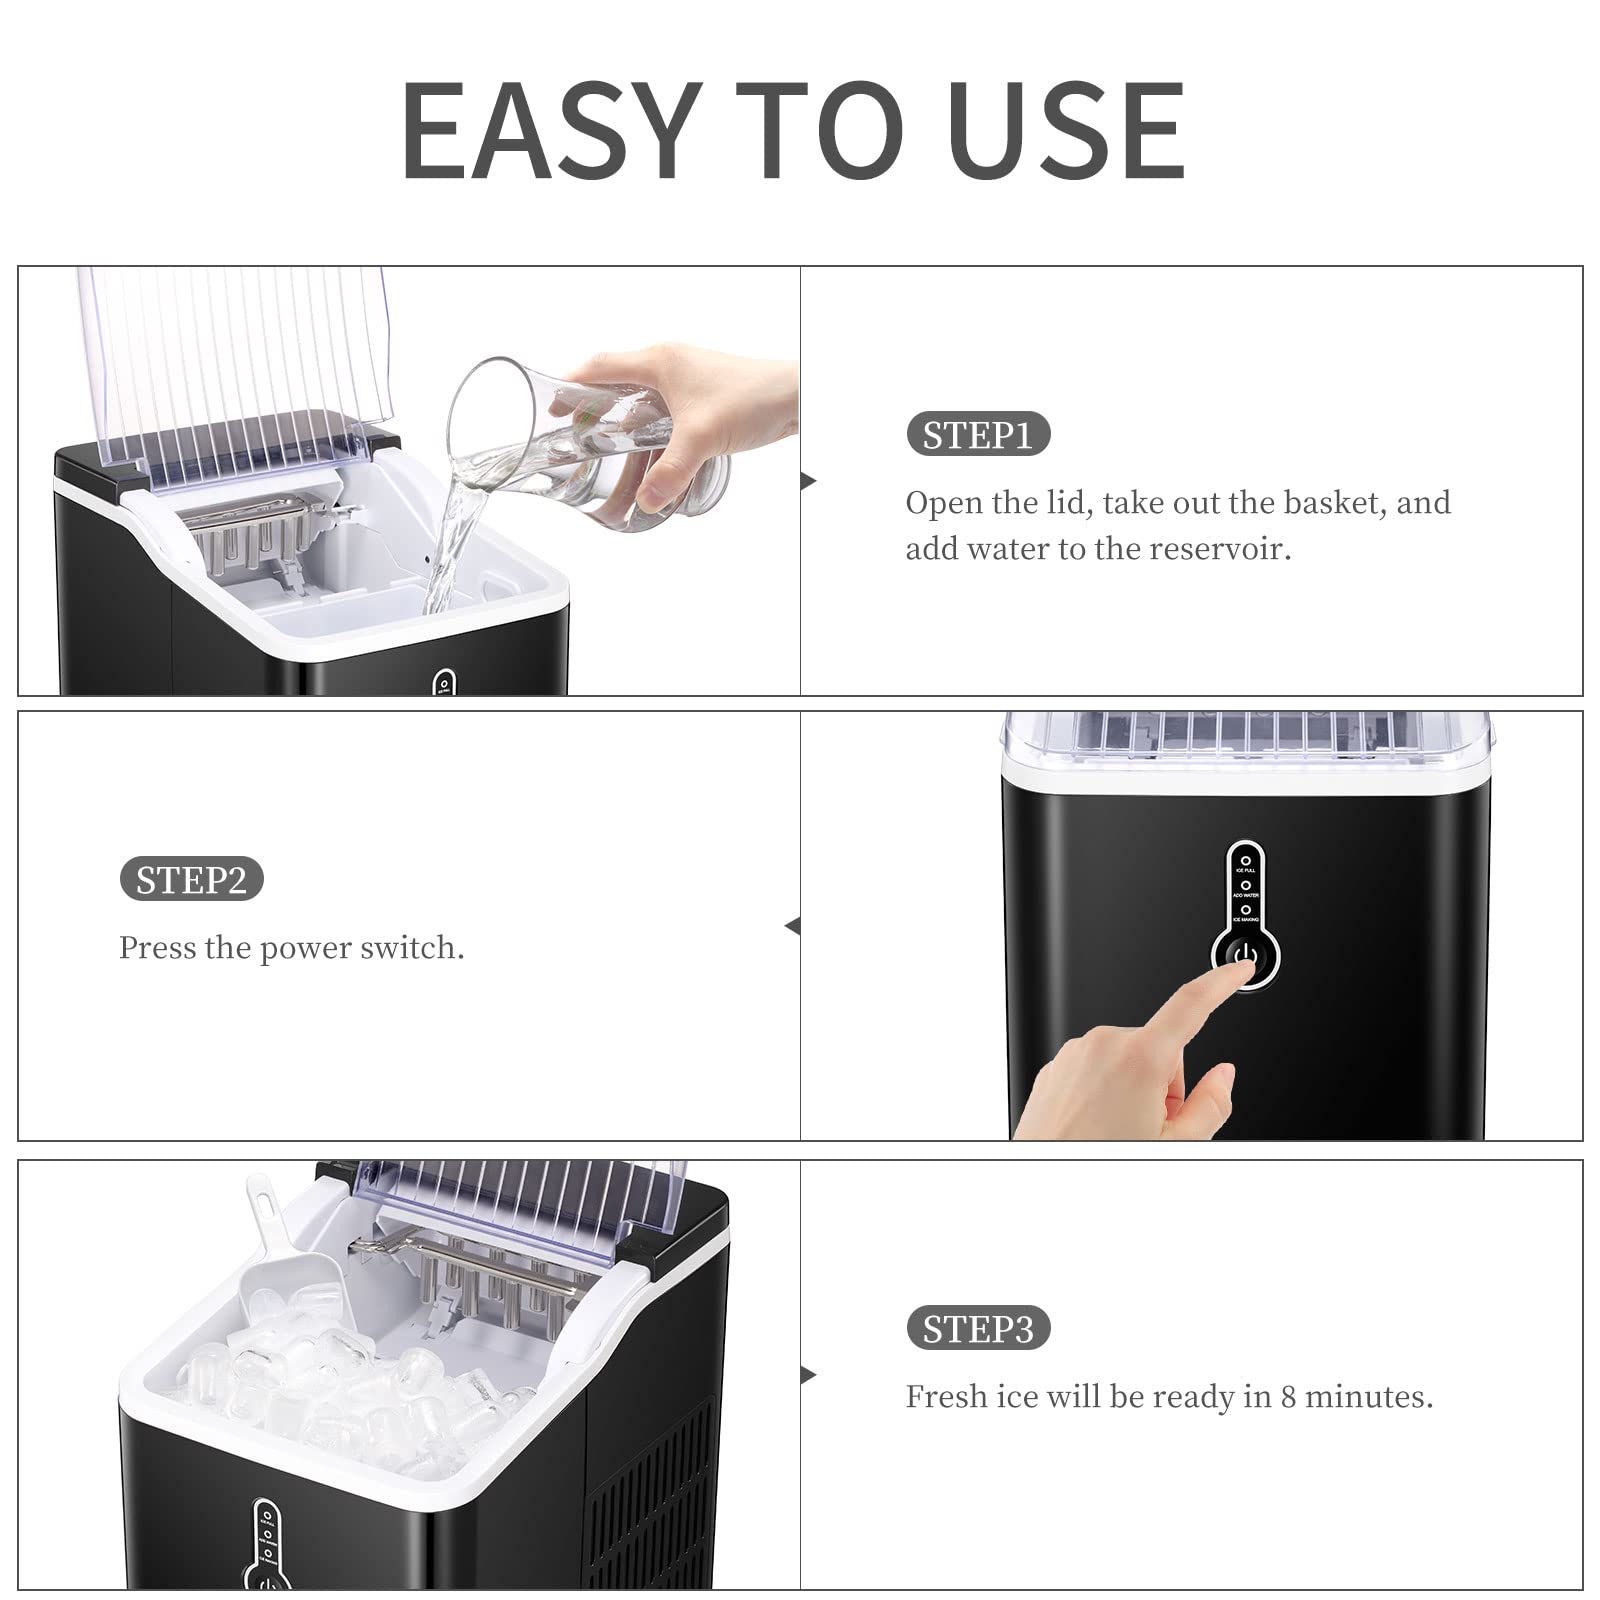 Antarctic Star 53 lb. Daily Production Square Clear Ice Portable Ice Maker for Parties, Bar, Office NBZ58XQD20AF-BLACK